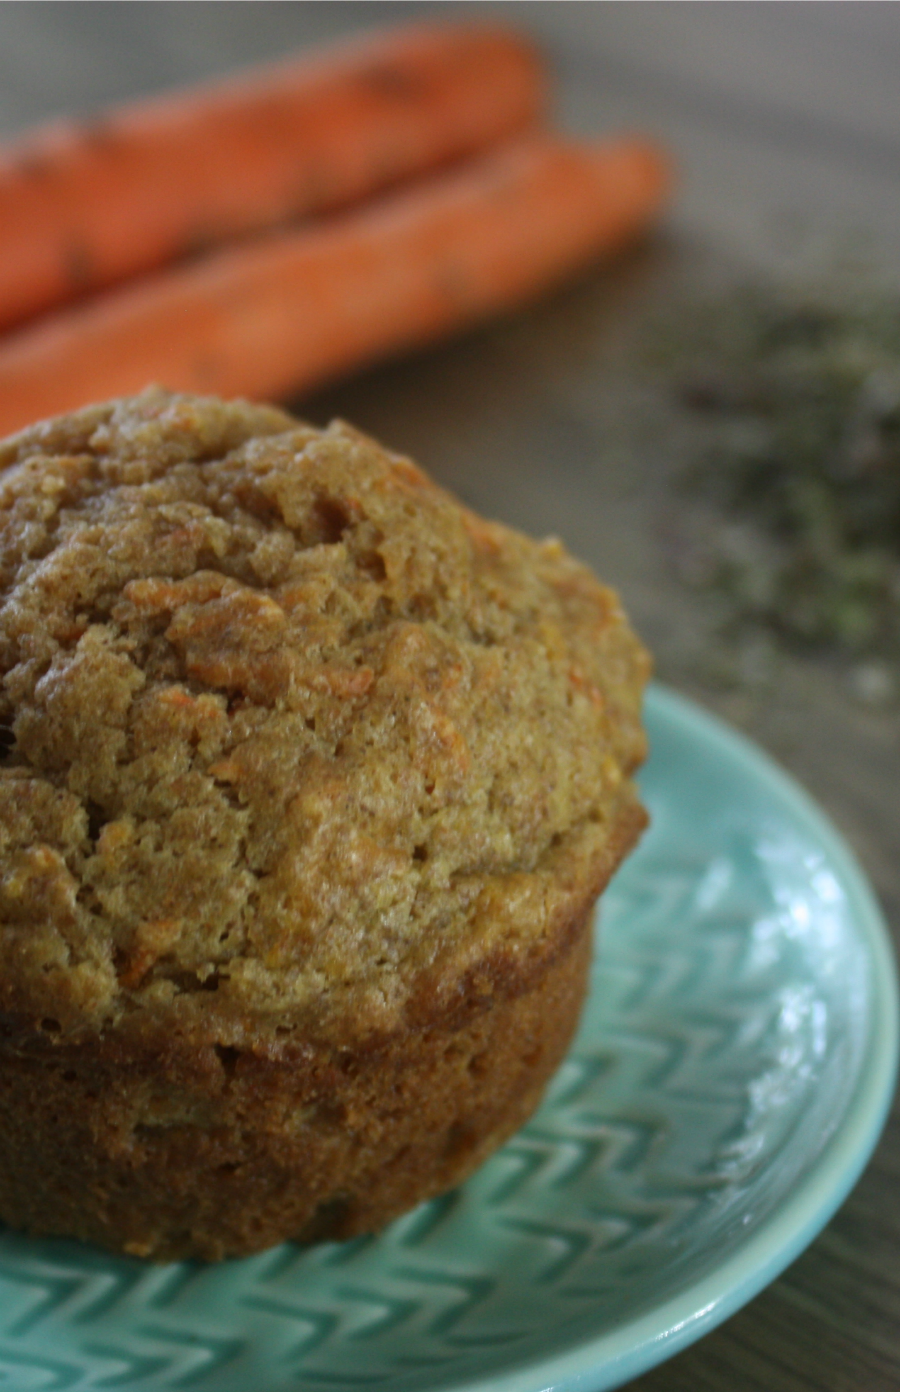 Carrot And Sage Muffins (With Maple Syrup Drizzle) | Growing Up Herbal | These sweet and savory muffins are a great start to your day when paired with some homemade yogurt and raw milk! Yum!